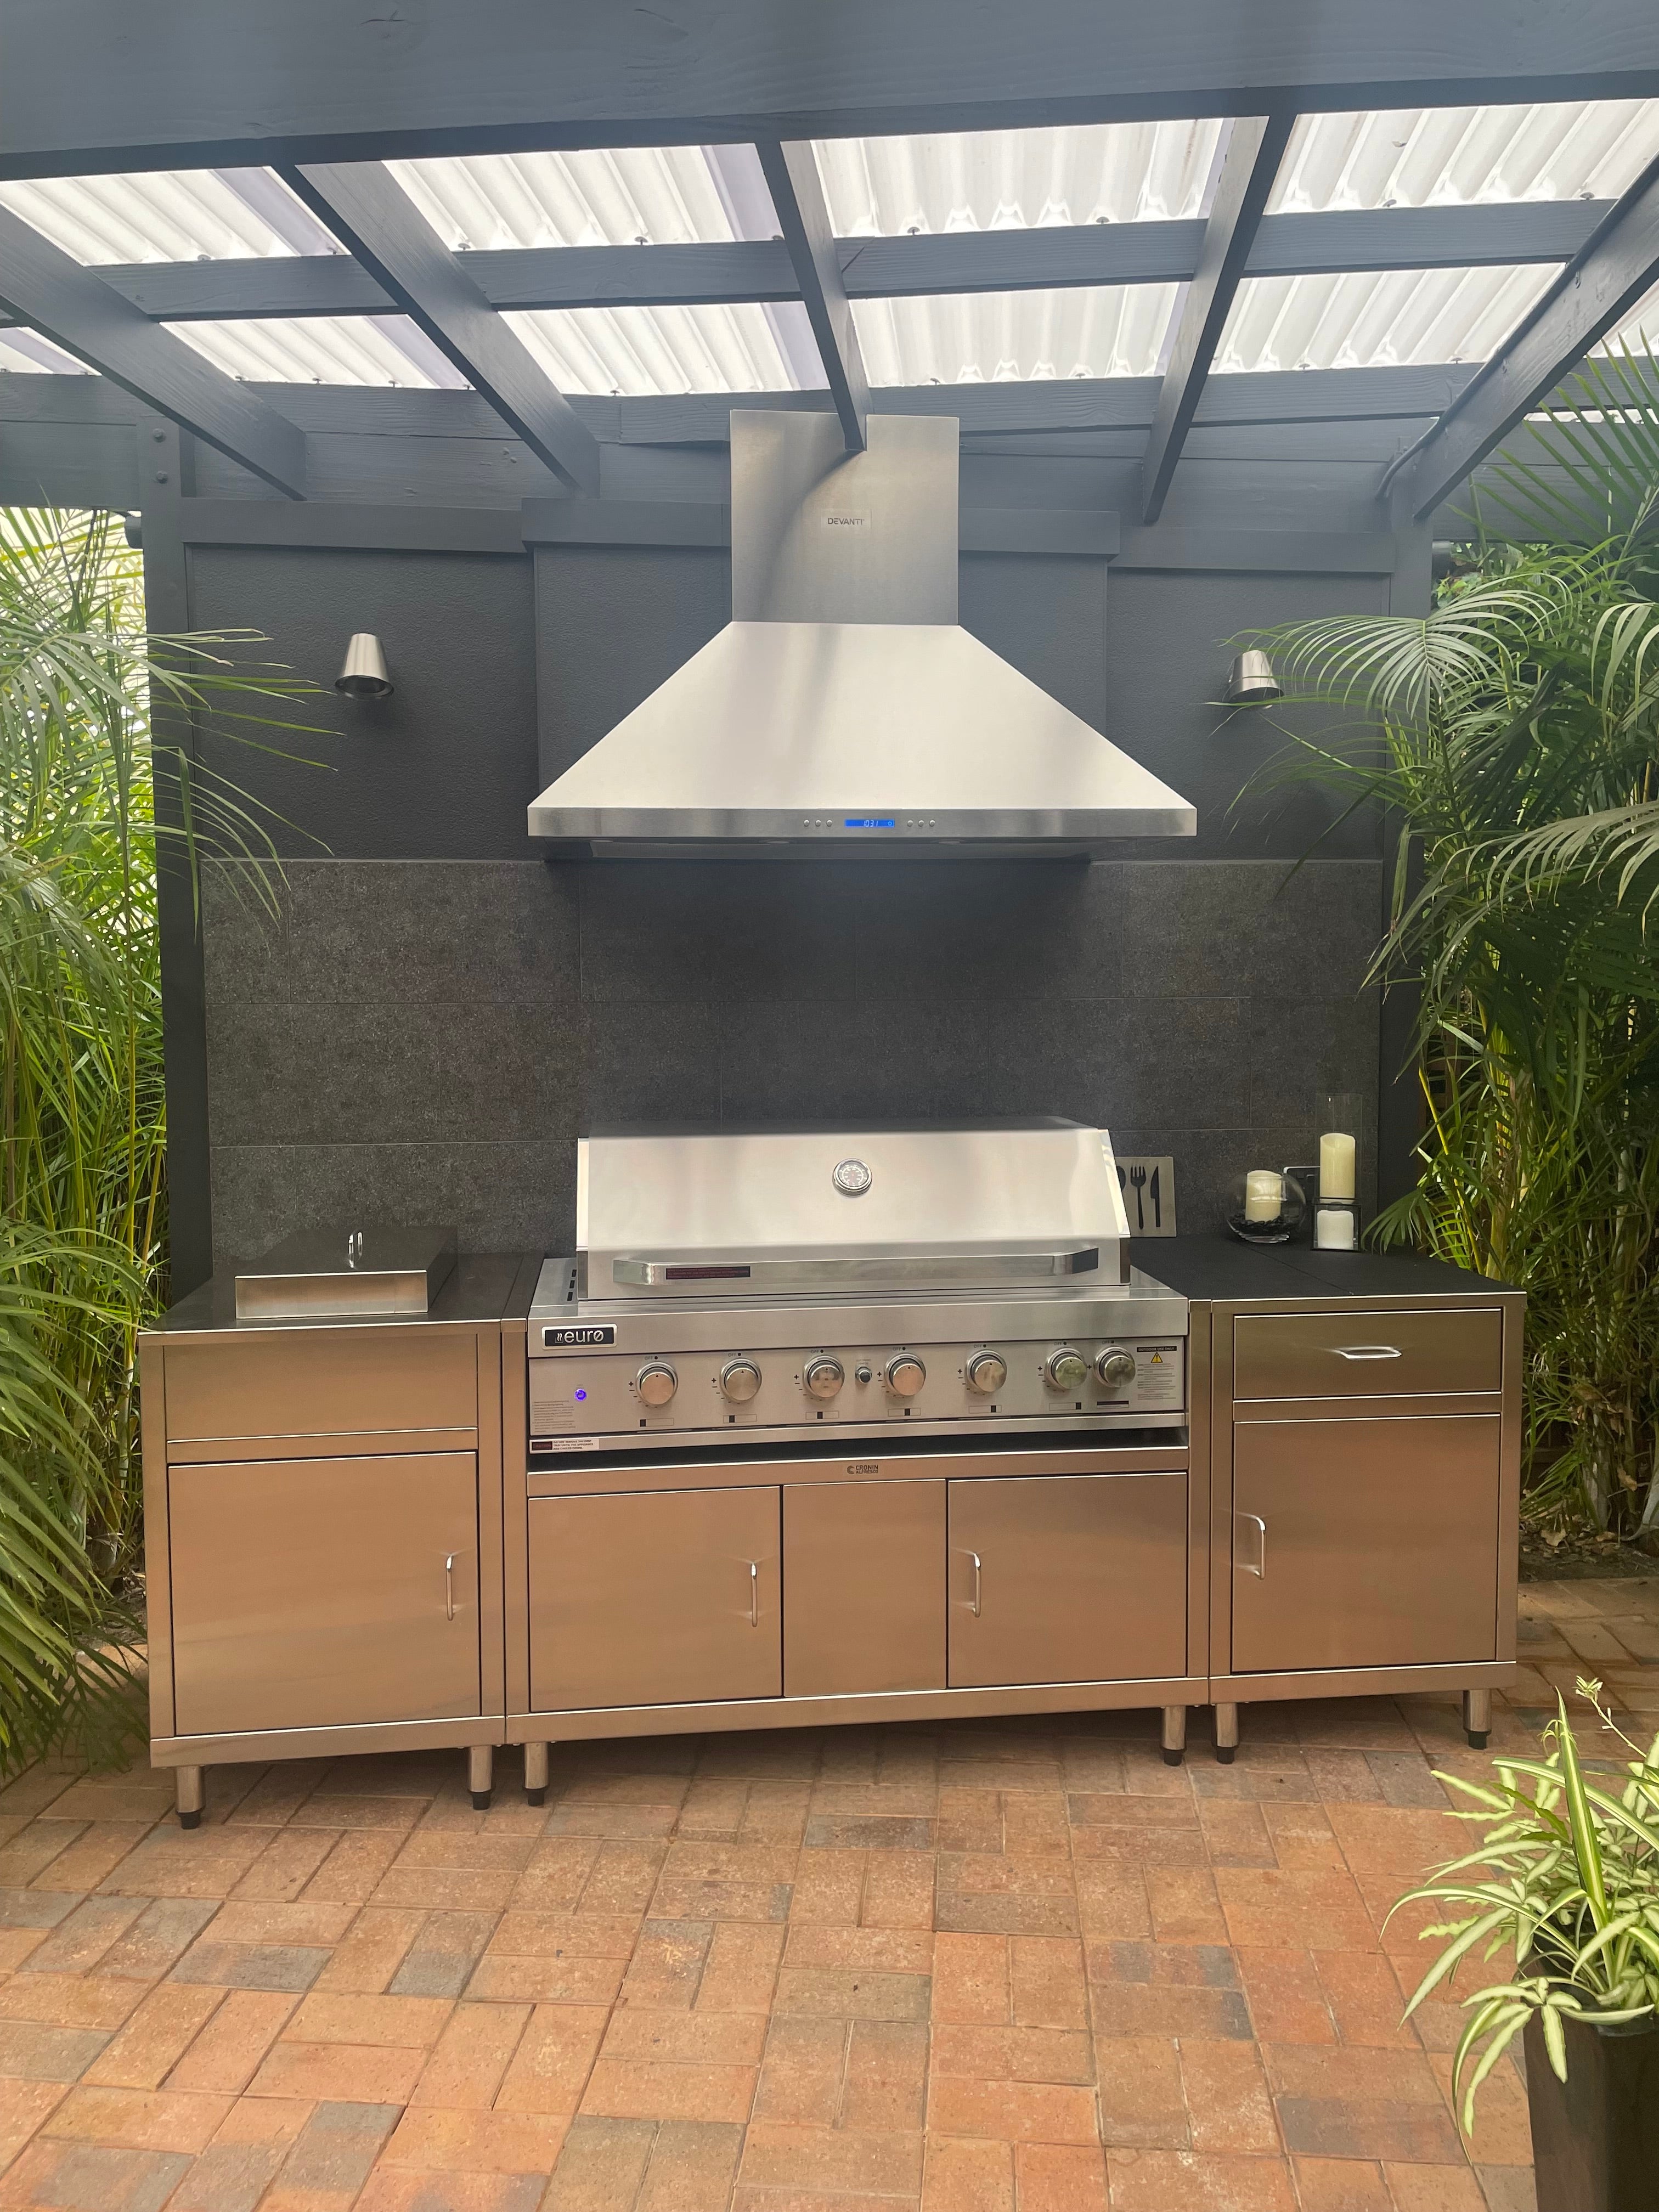 Stainless steel outdoor kitchen with BBQ , side burner and rangehood